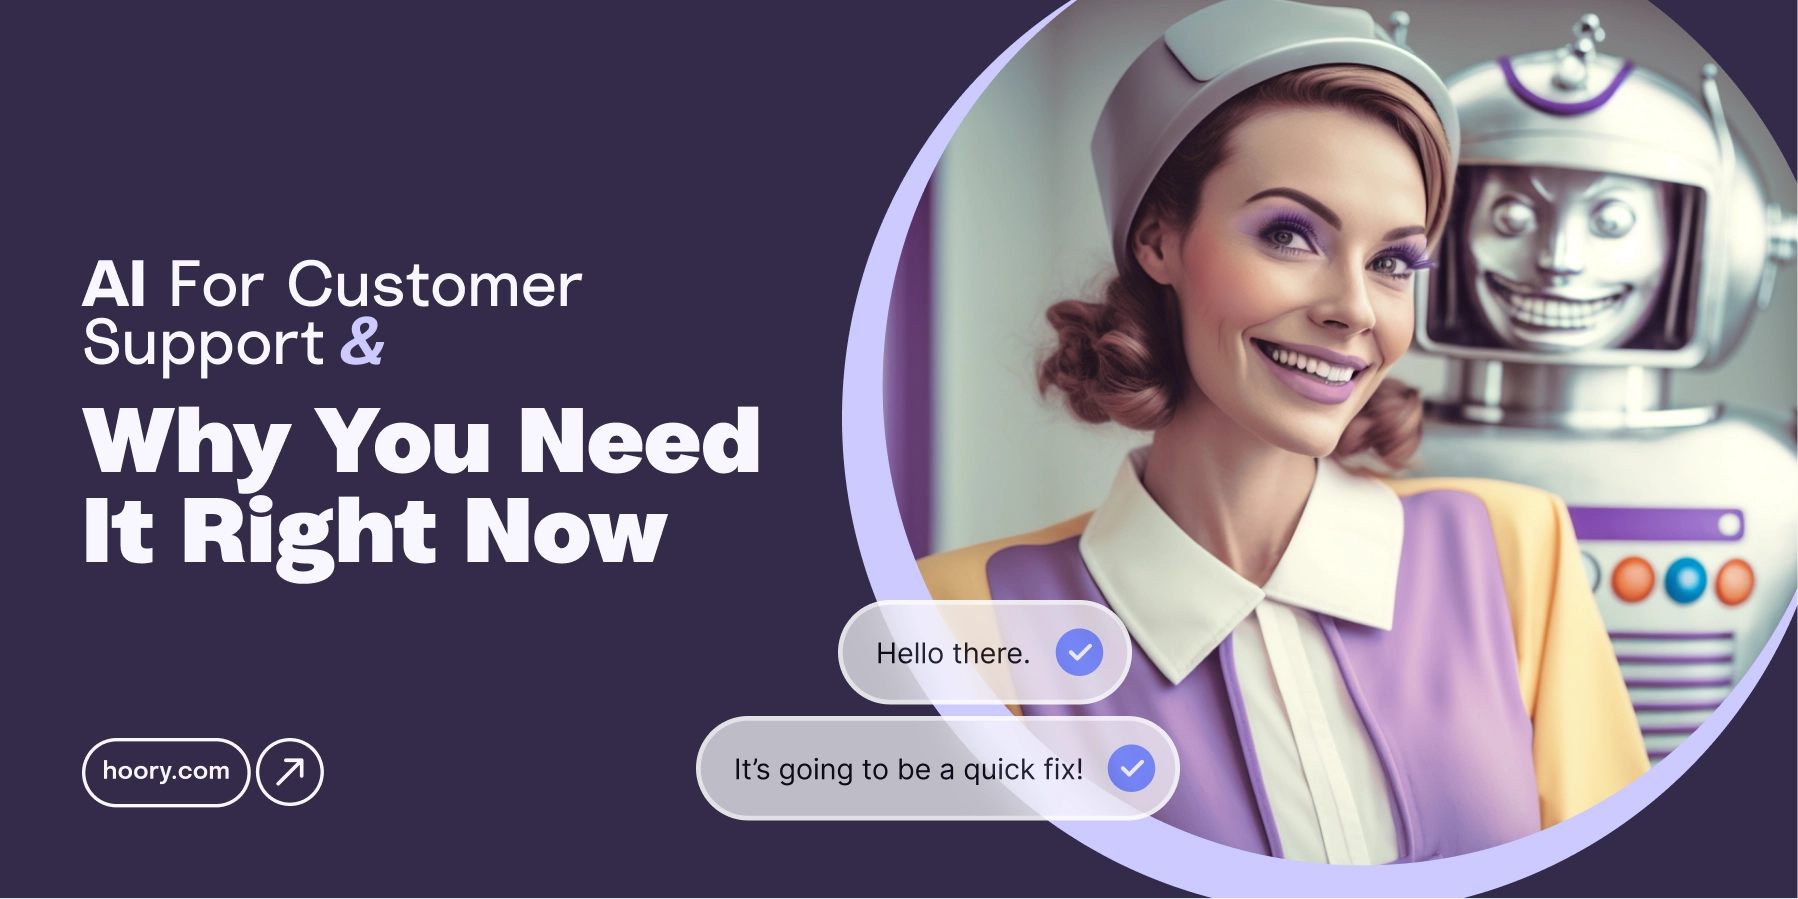 AI for Customer Support and Why You Need It Right Now